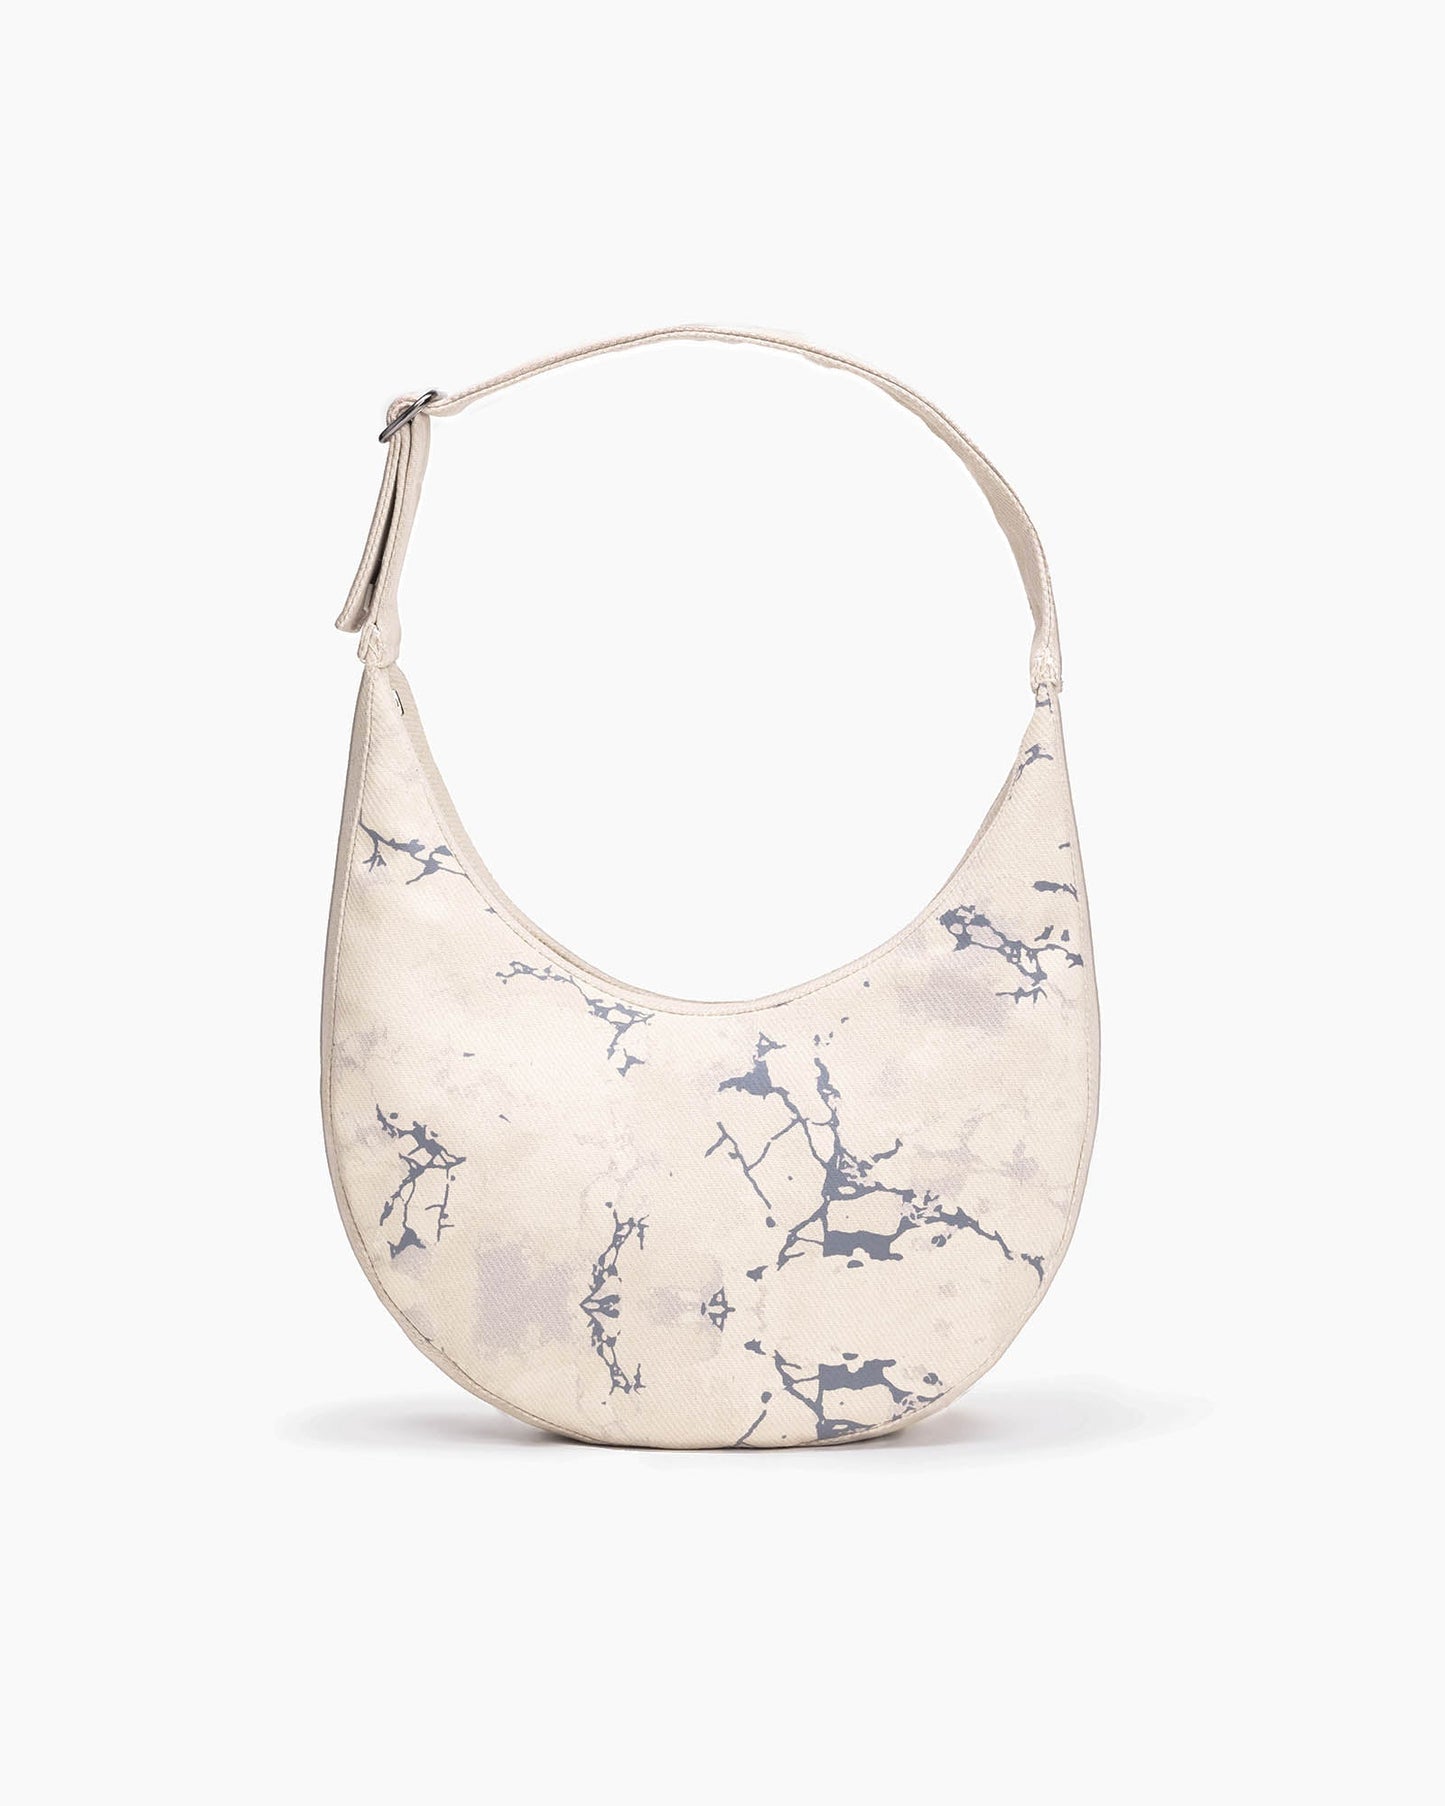 The Moon Bag - Marble Marvel Ecoright